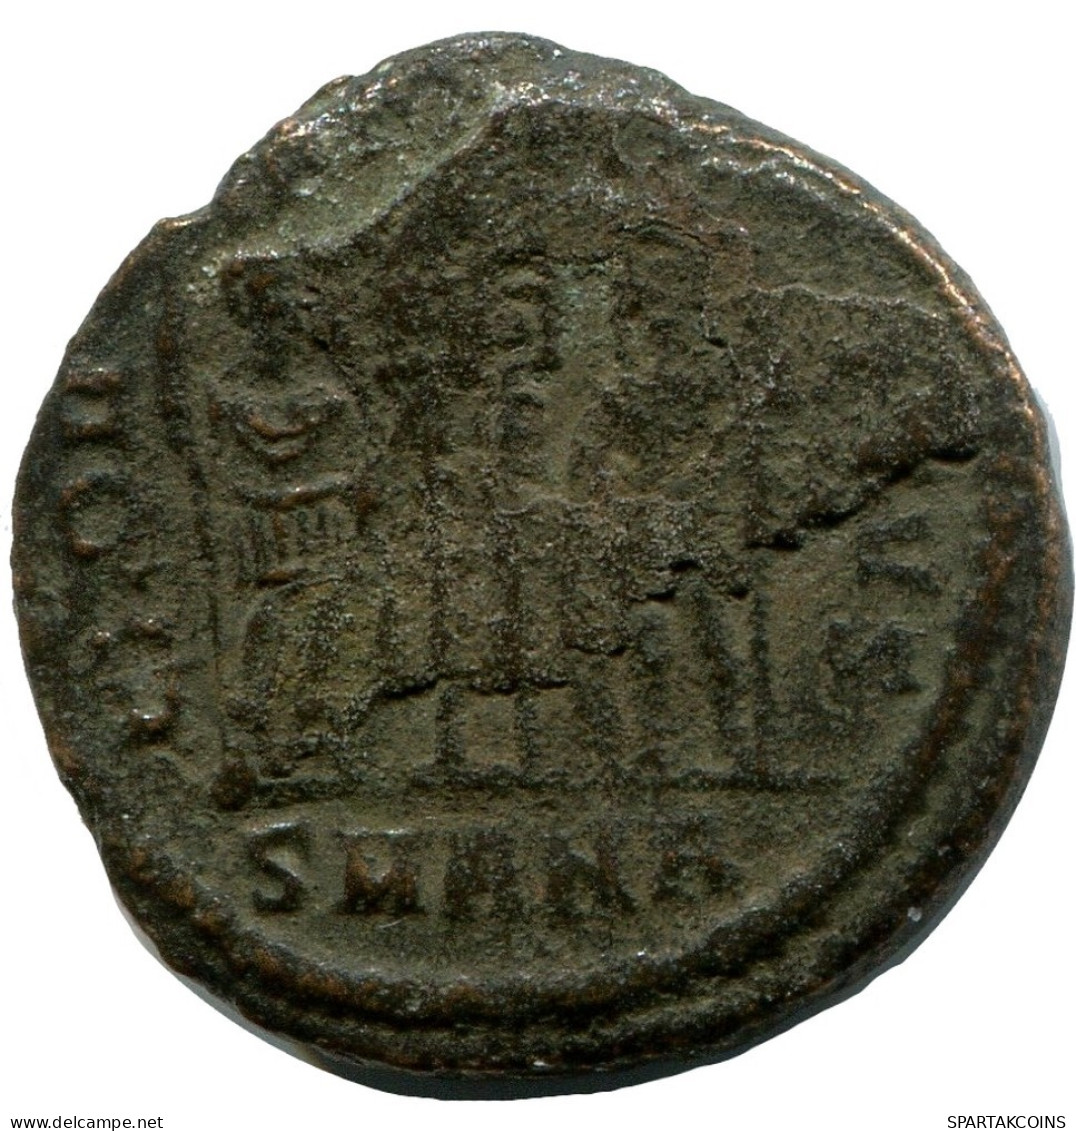 CONSTANTINE I MINTED IN ANTIOCH FOUND IN IHNASYAH HOARD EGYPT #ANC10626.14.F.A - L'Empire Chrétien (307 à 363)